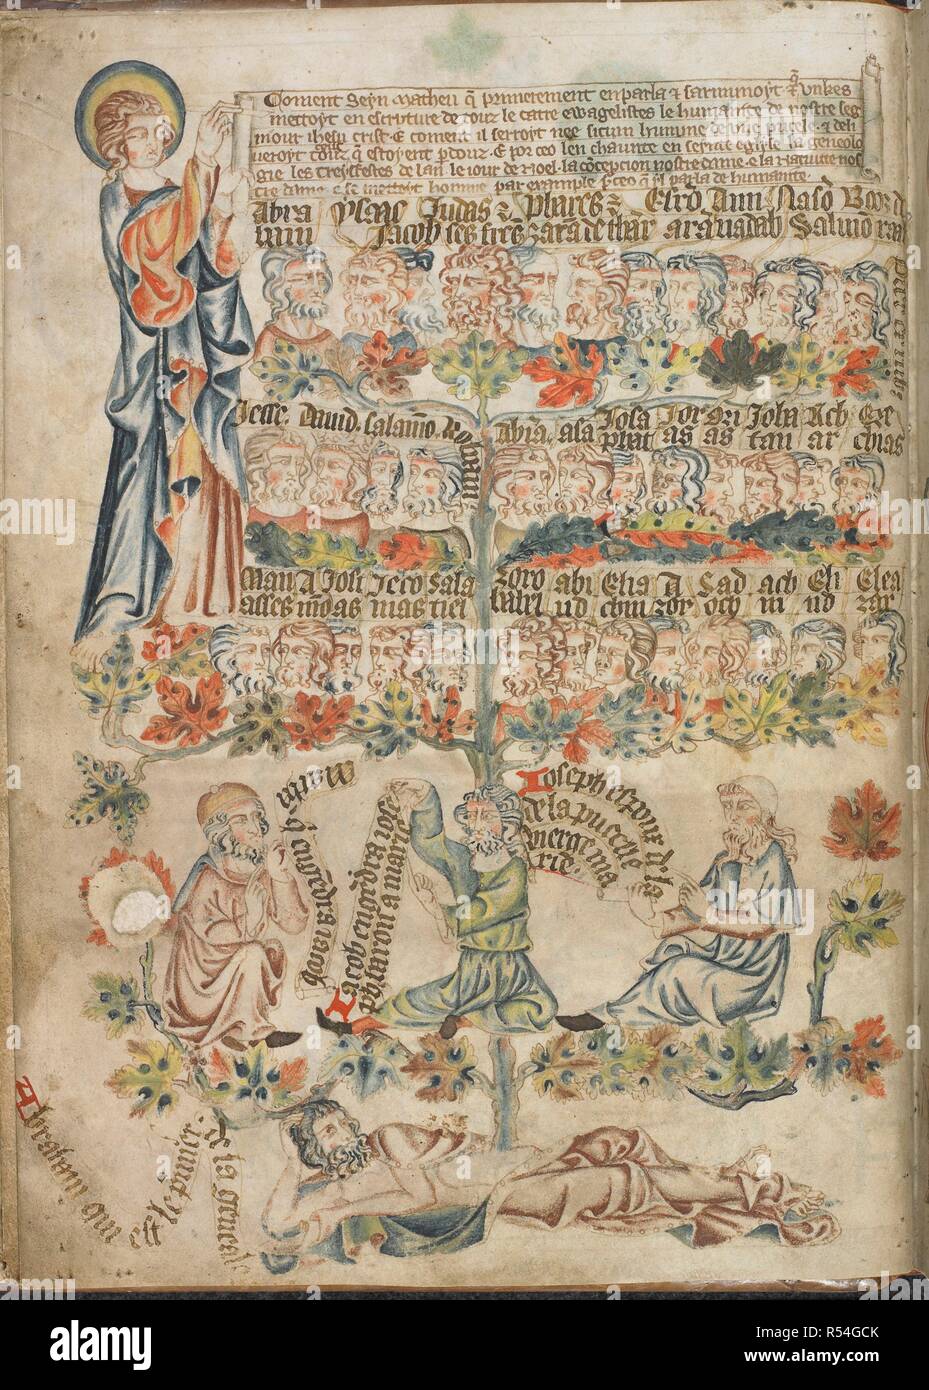 Jesse Tree showing the descent of Christ from Abraham, with St Matthew on the left holding a scroll and writing on it in cursive script. . Holkham Bible Picture Book. England, circa 1320-1330. Source: Add. 47682, f.10v. Stock Photo